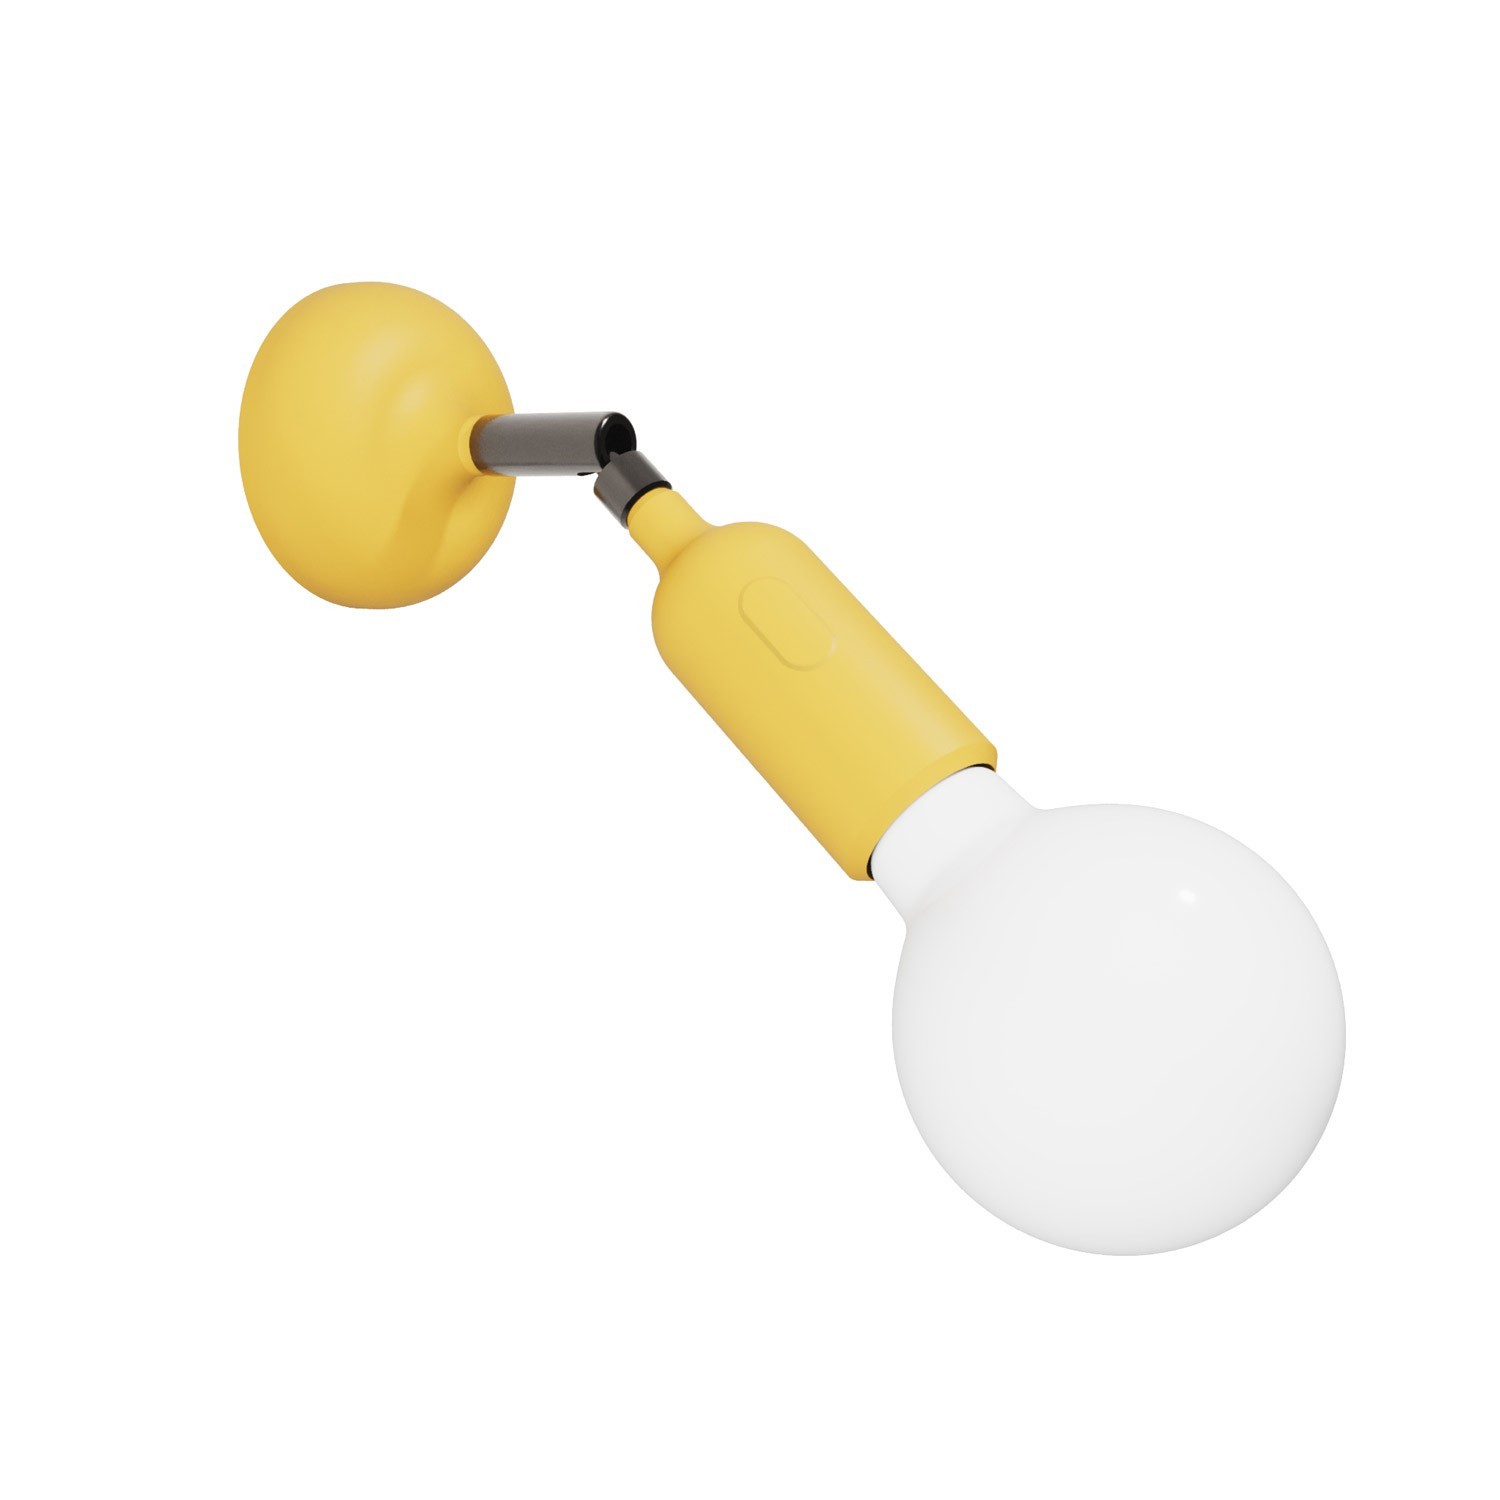 Silicone Fermaluce lamp with joint and built-in switch